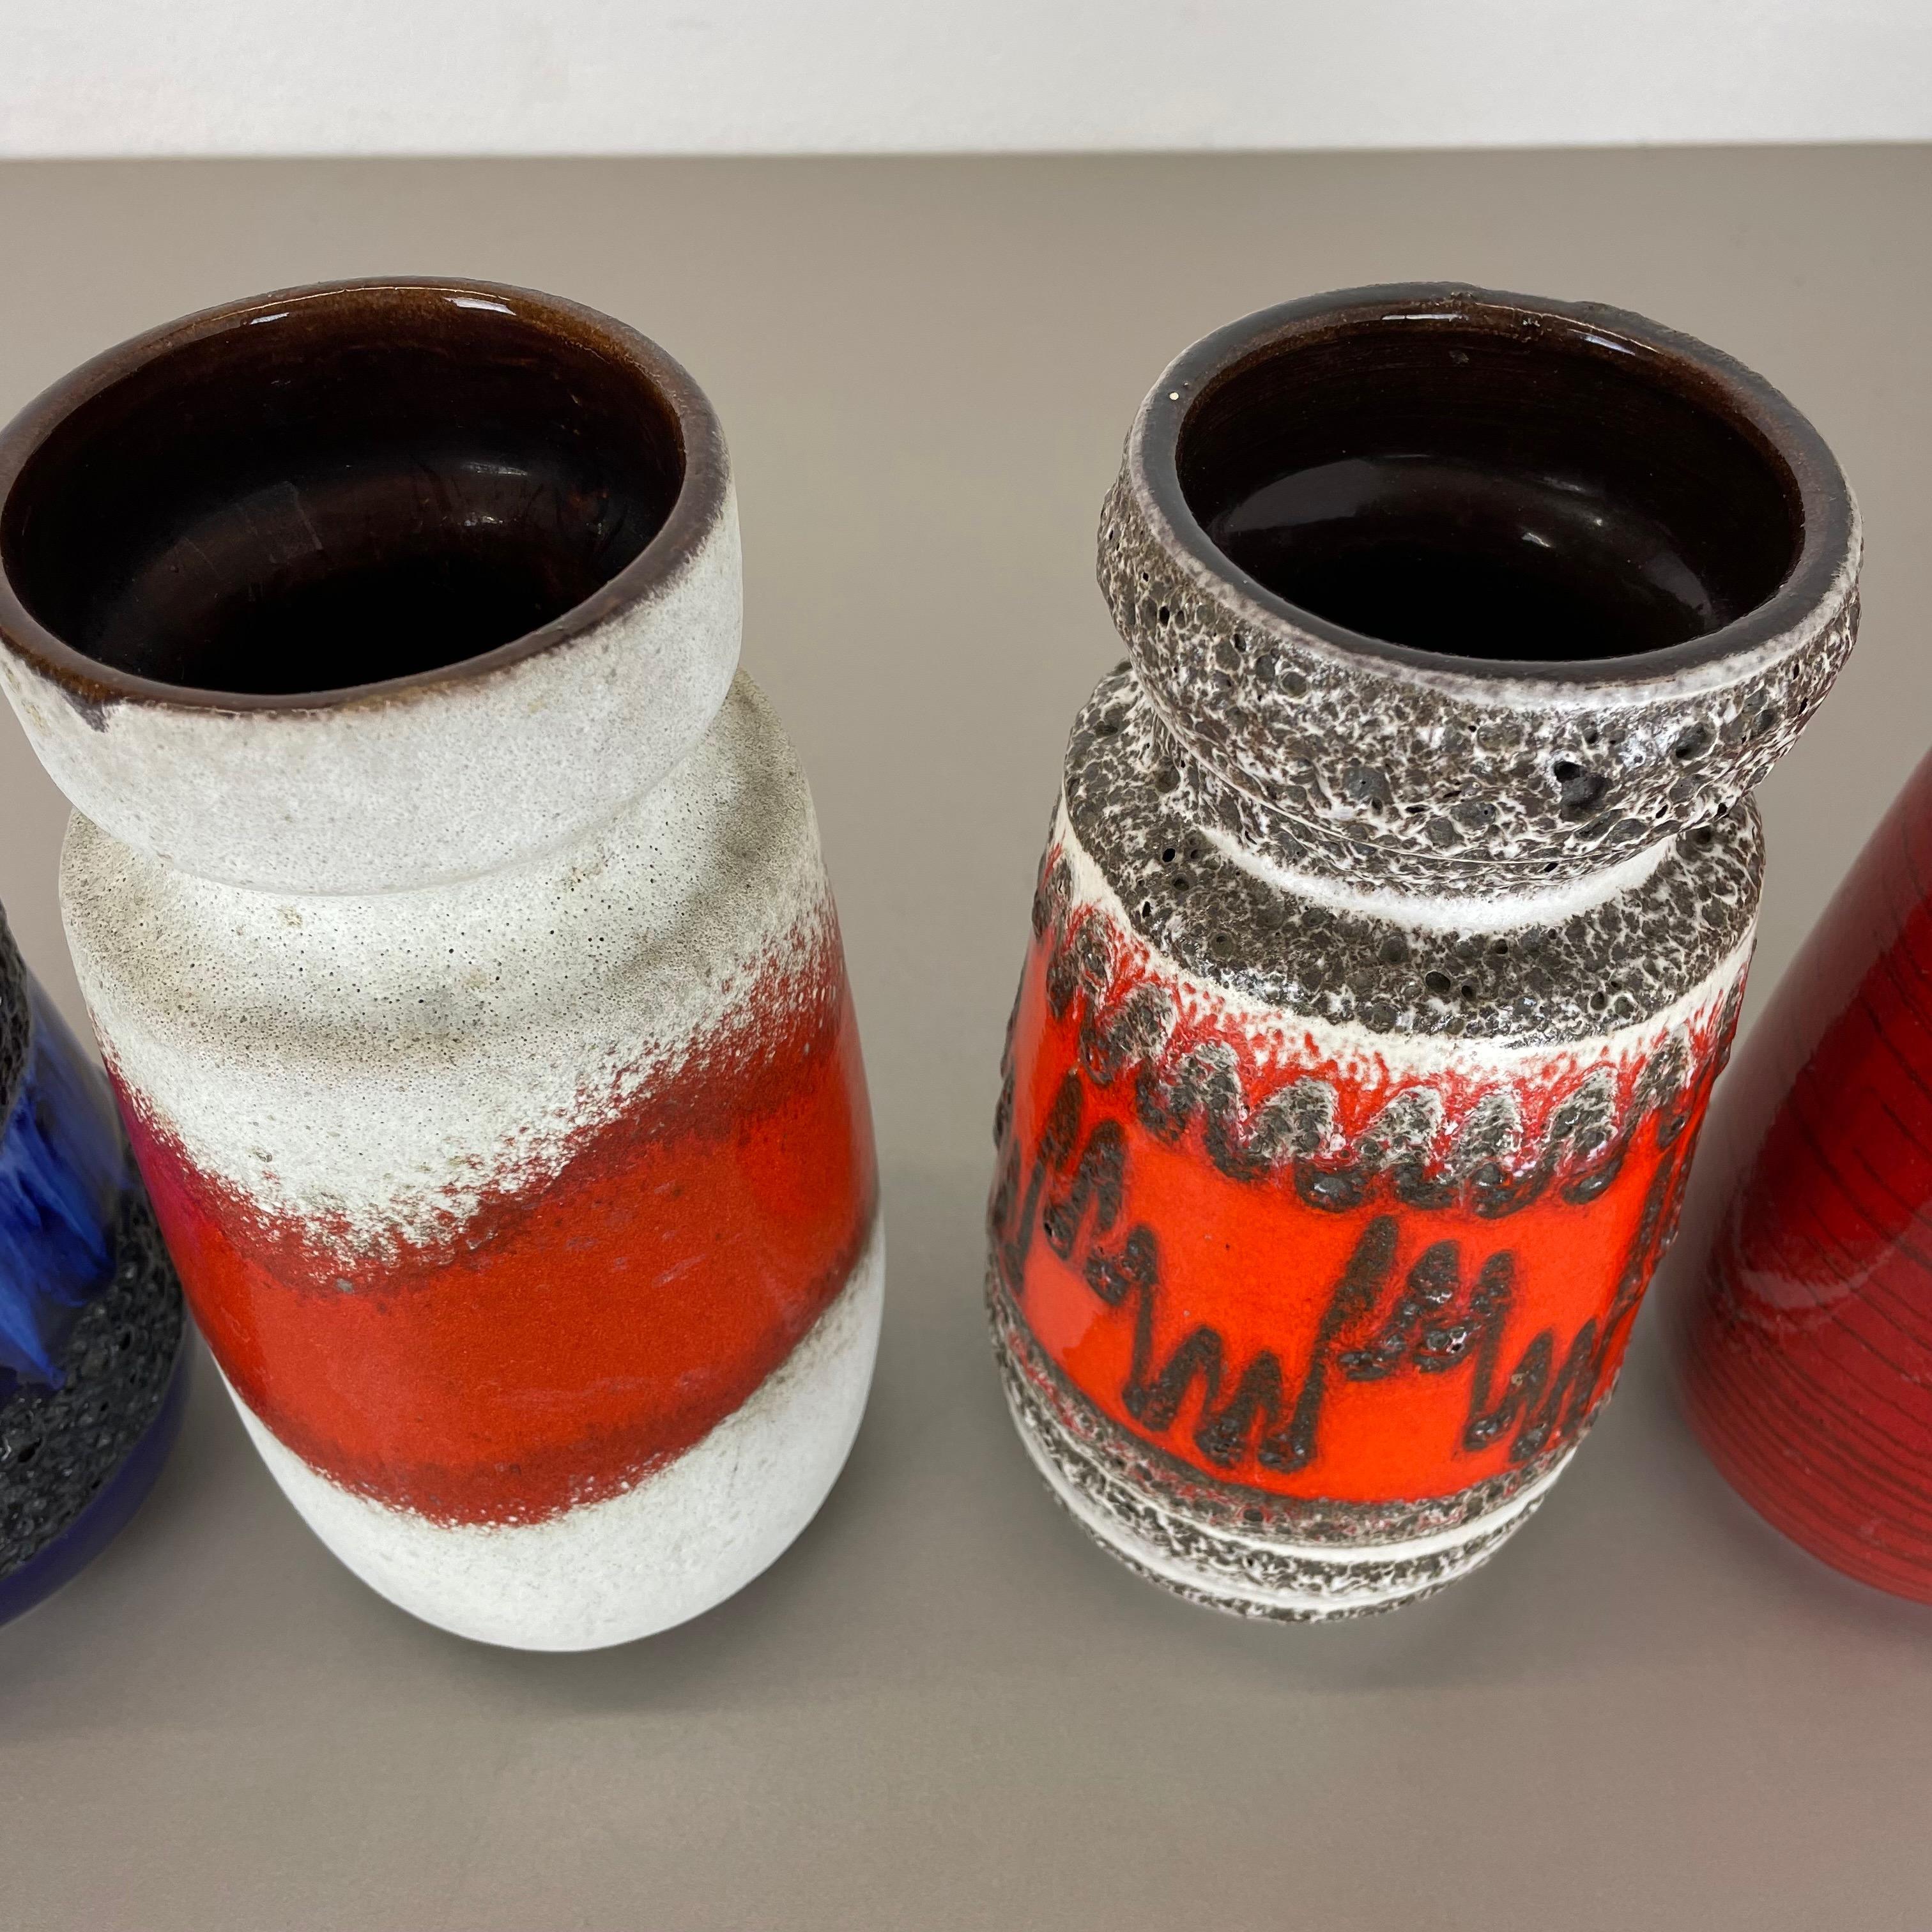 Set of Four Vintage Pottery Fat Lava Vases Made by Scheurich, Germany, 1970s For Sale 5